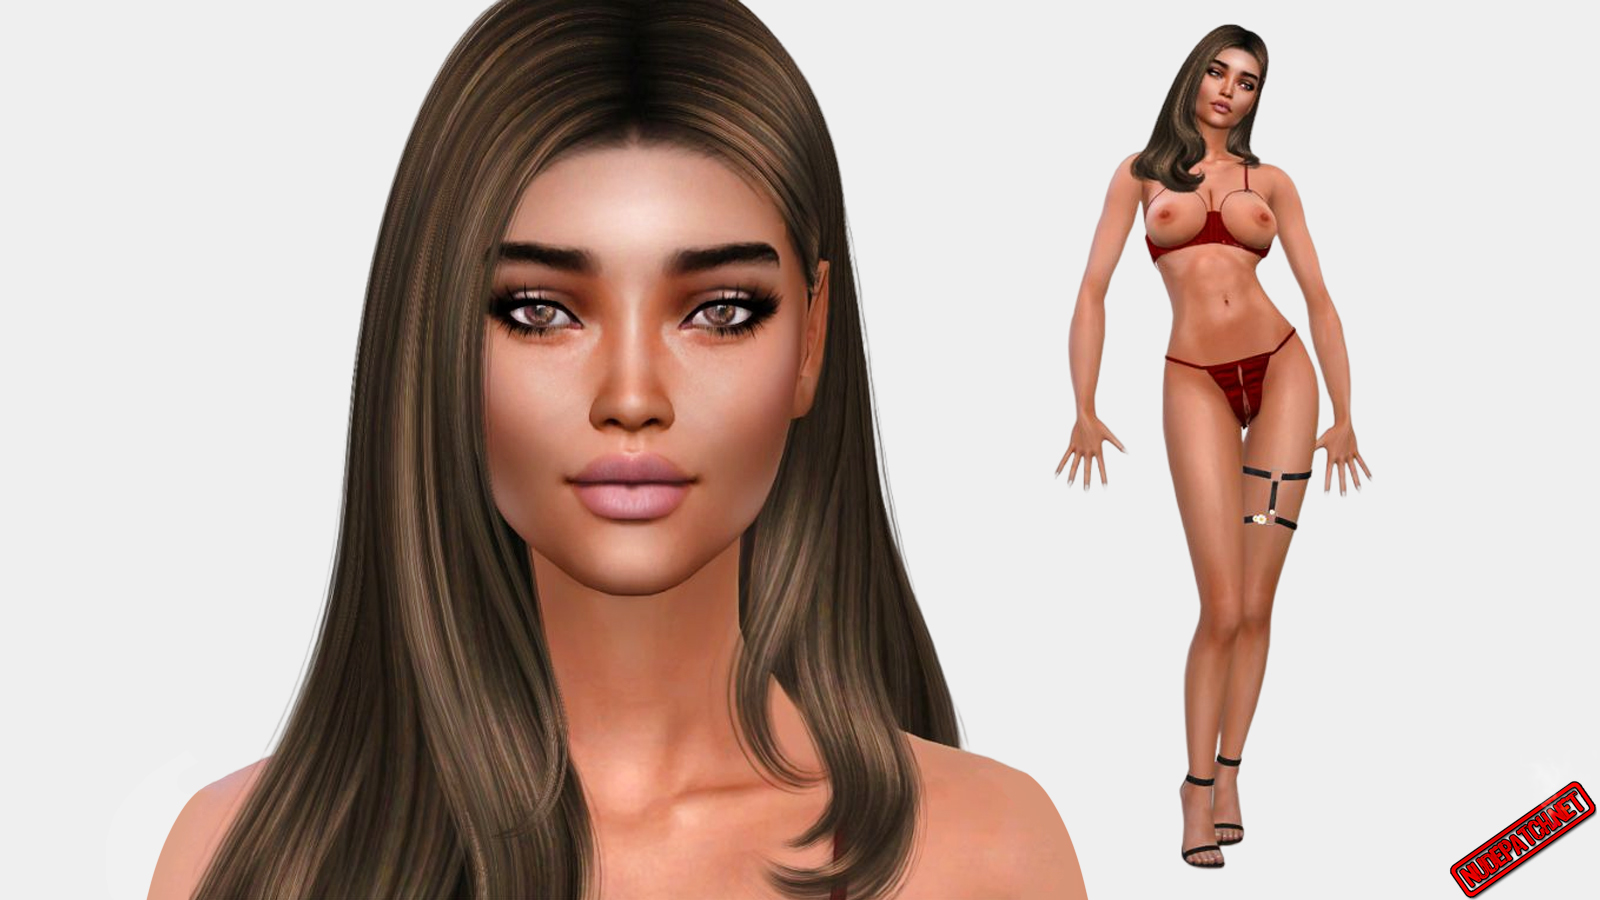 dominique ambrose share the sims naked mod photos